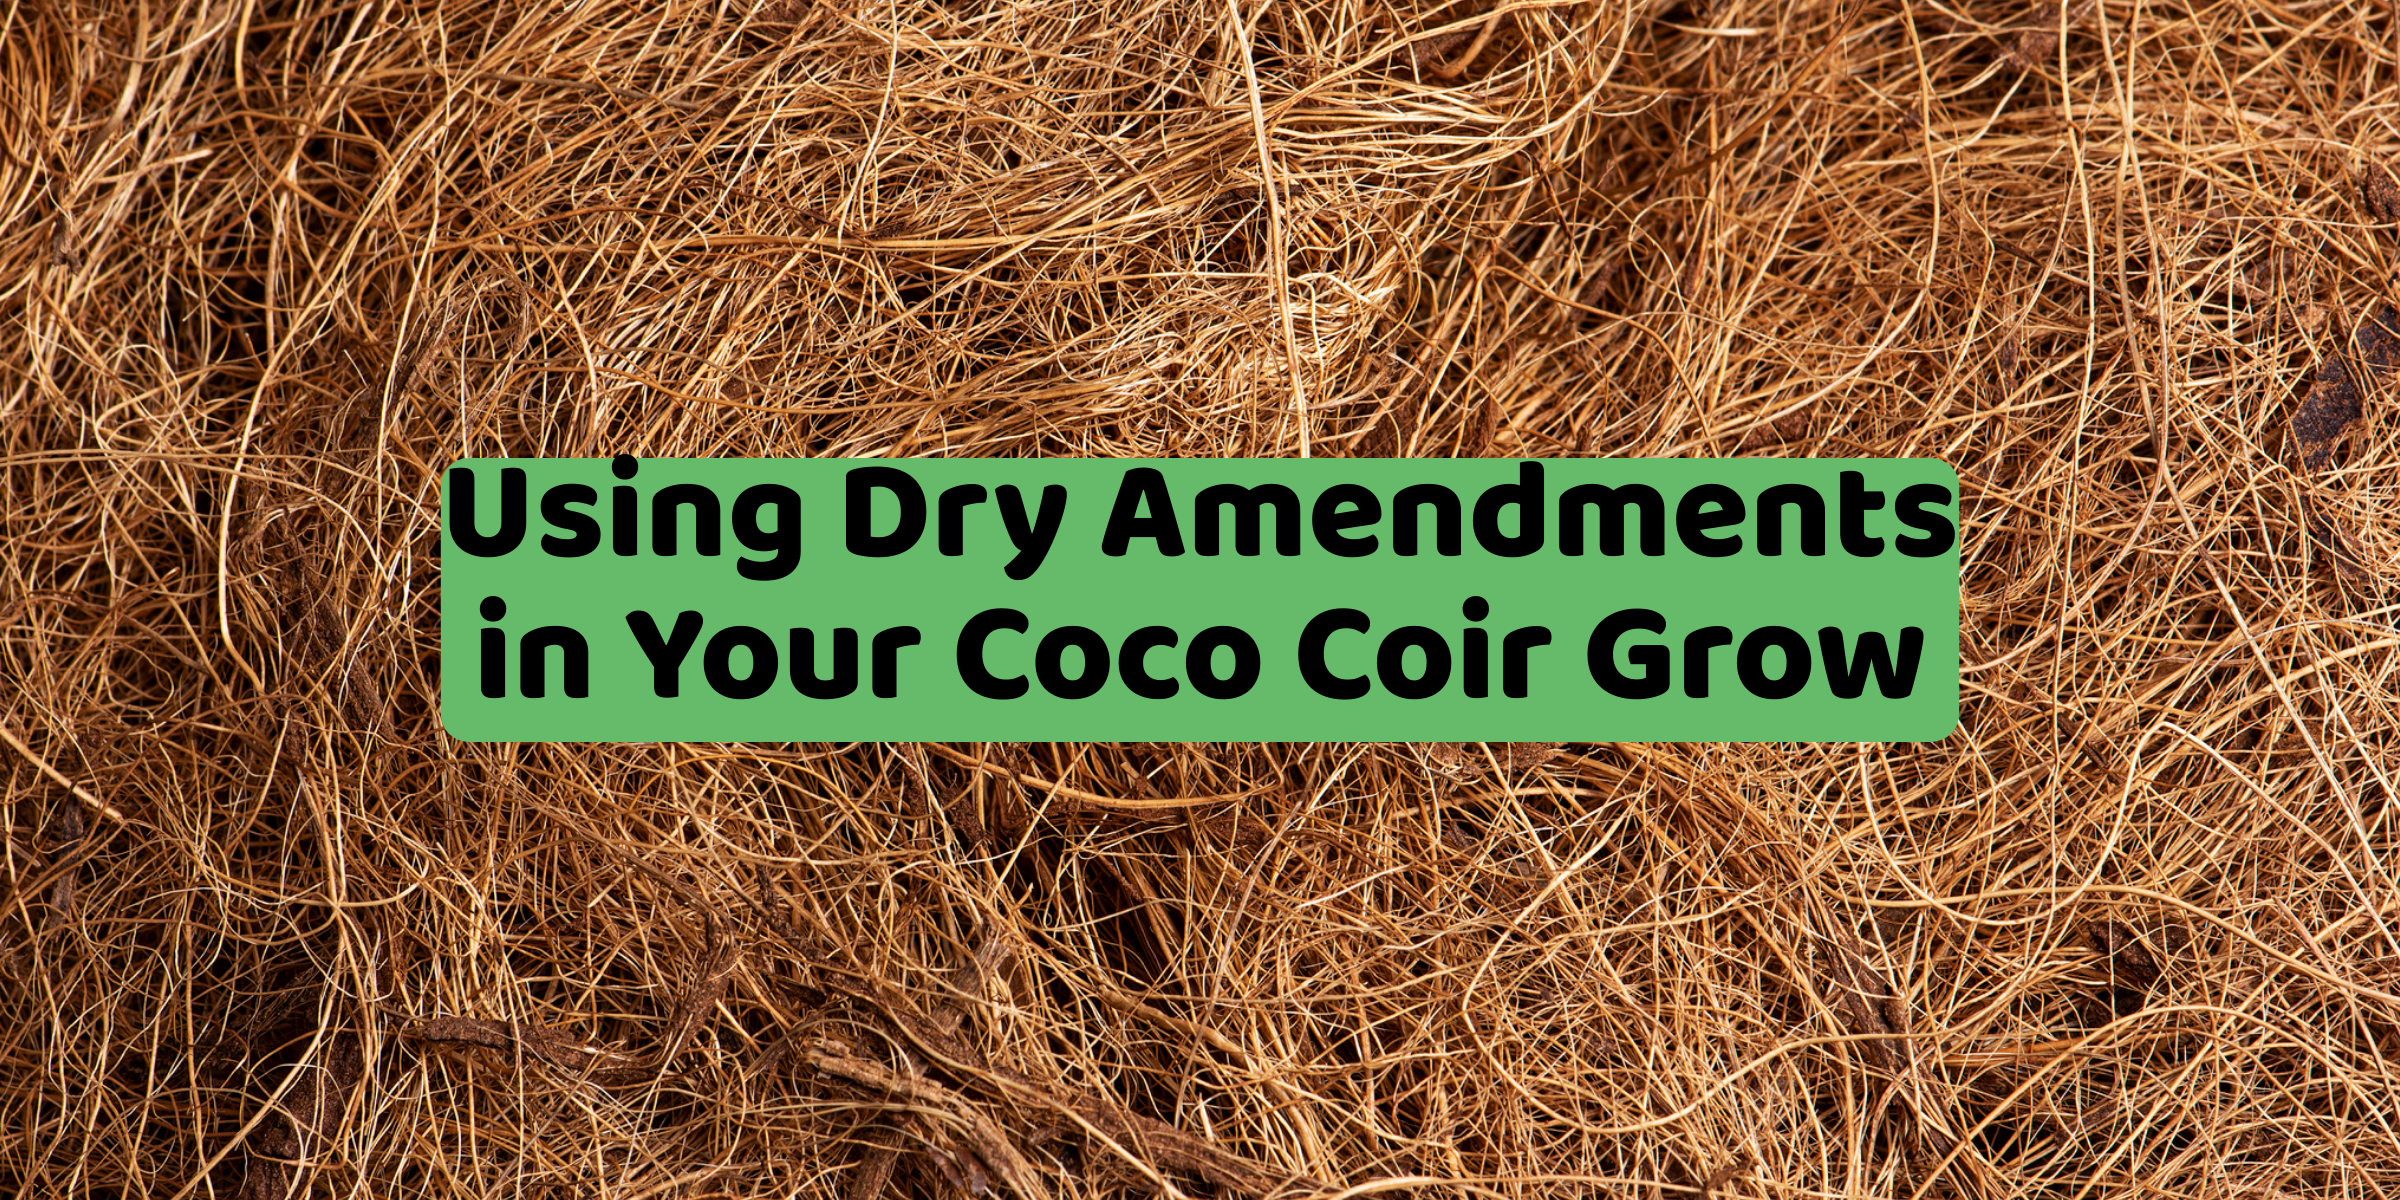 Using Dry Amendments in Your Coco Coir Grow